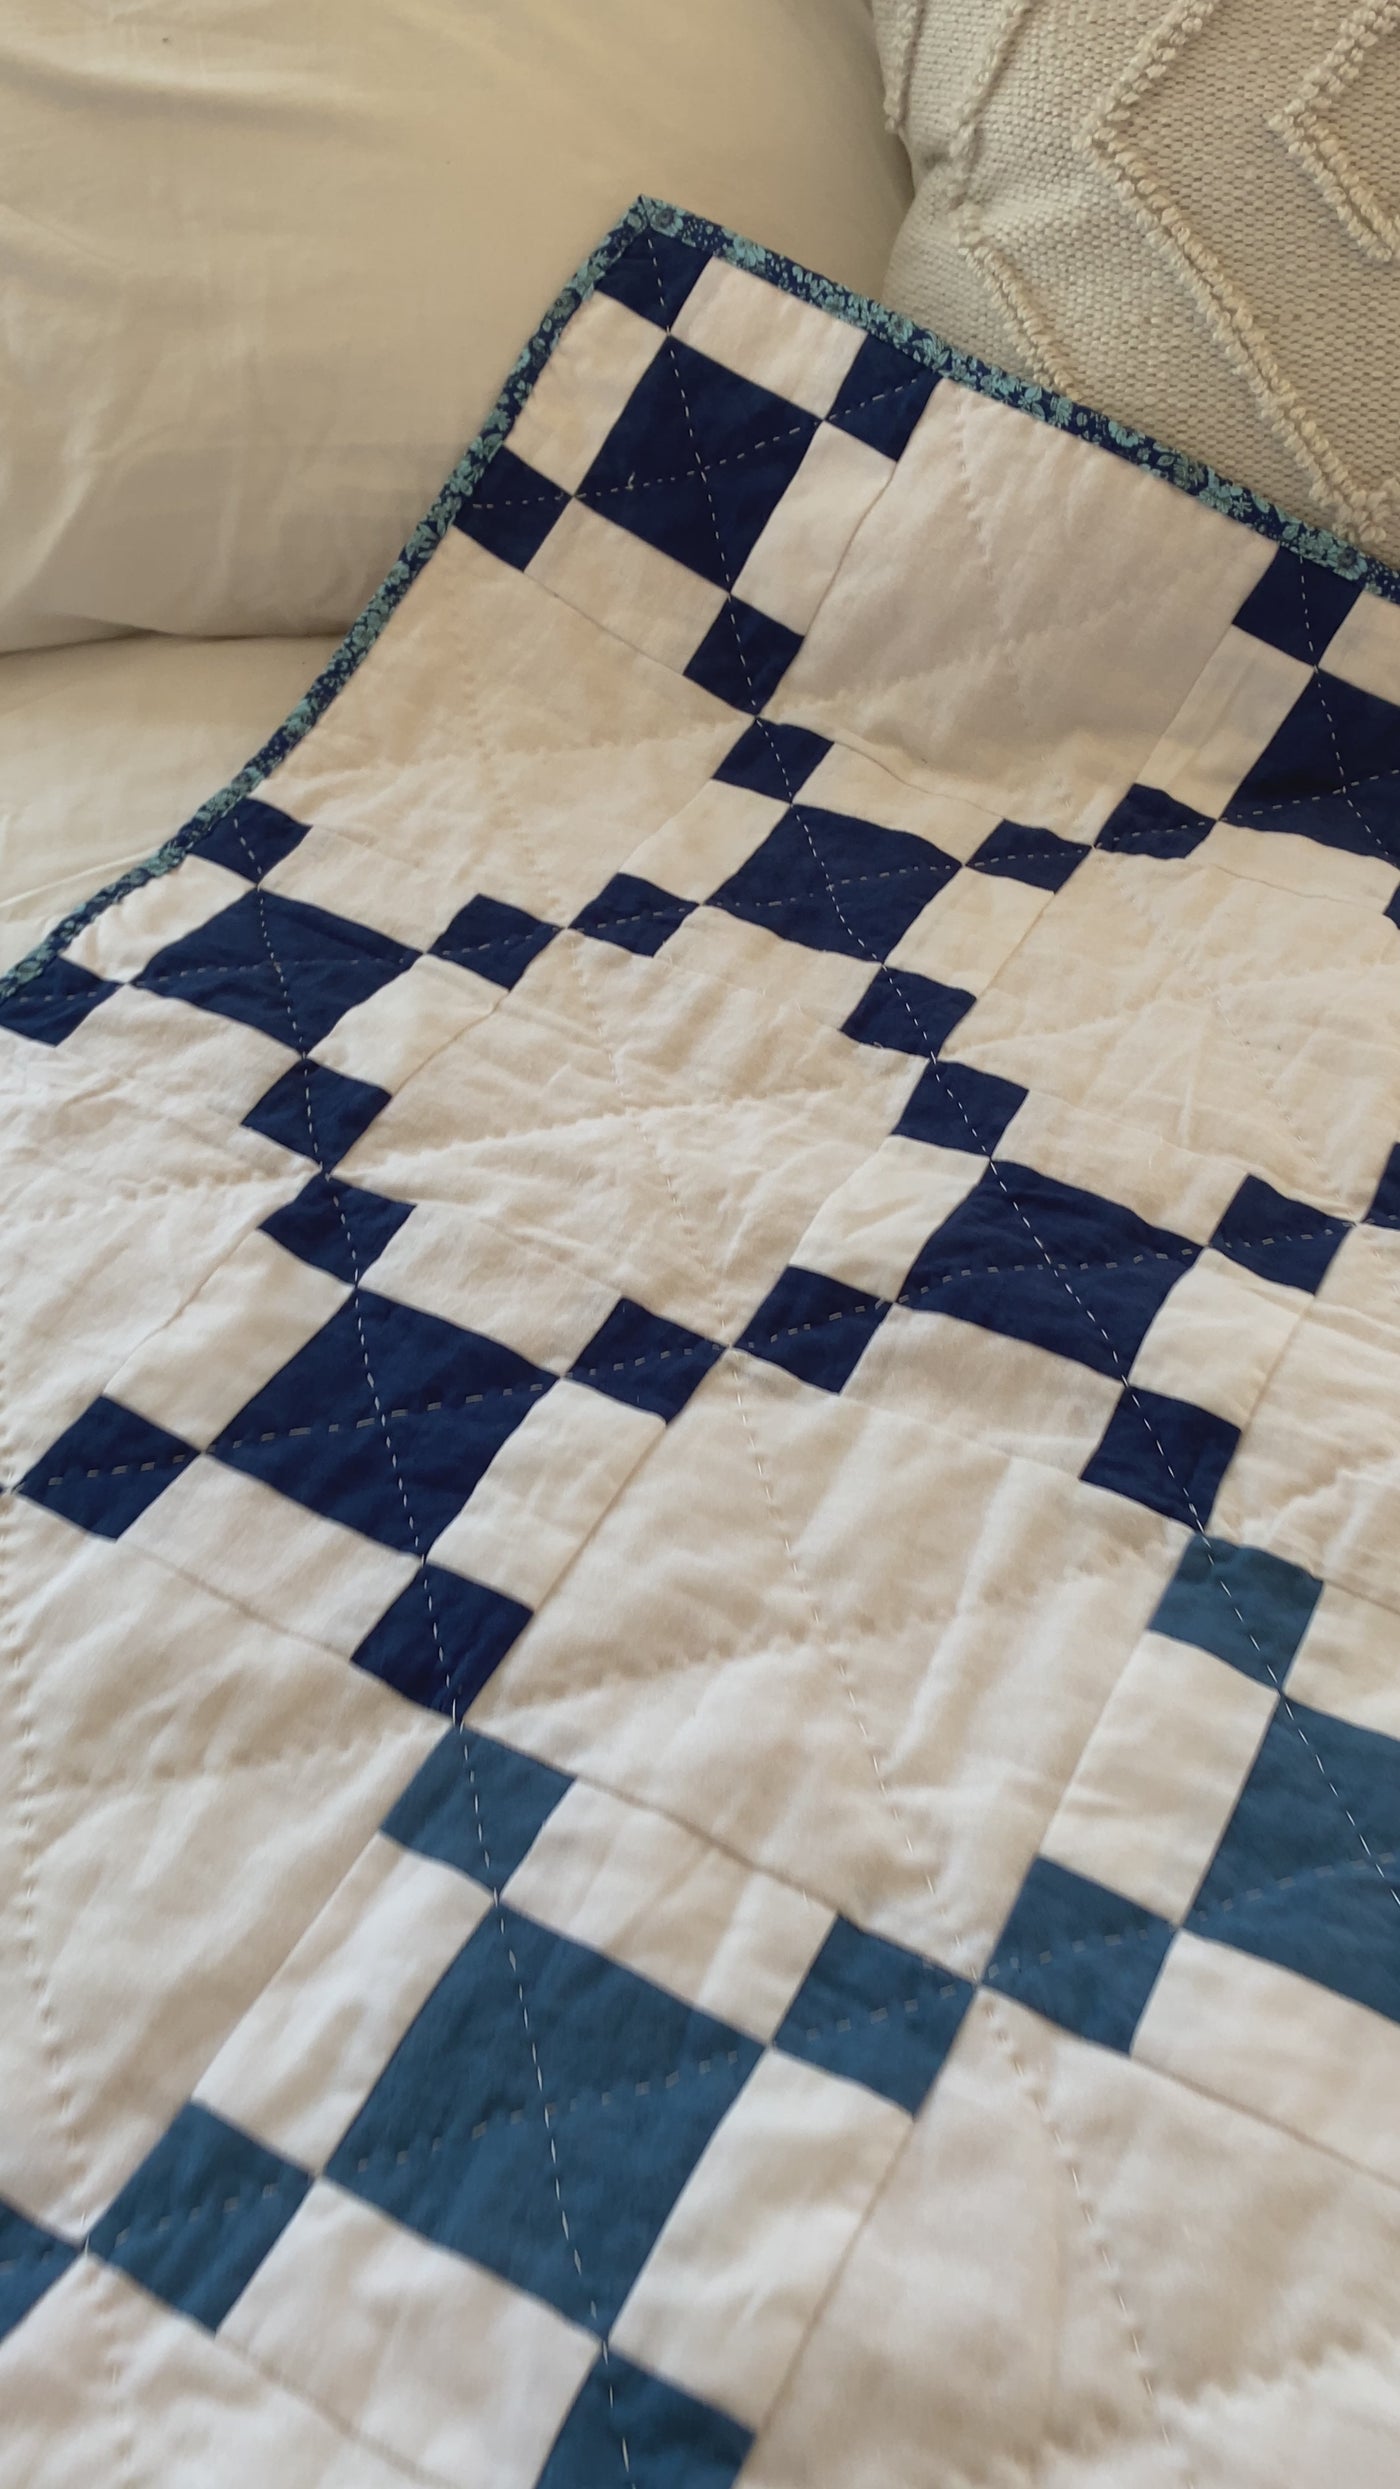 Night Fall Classic- Hand quilted